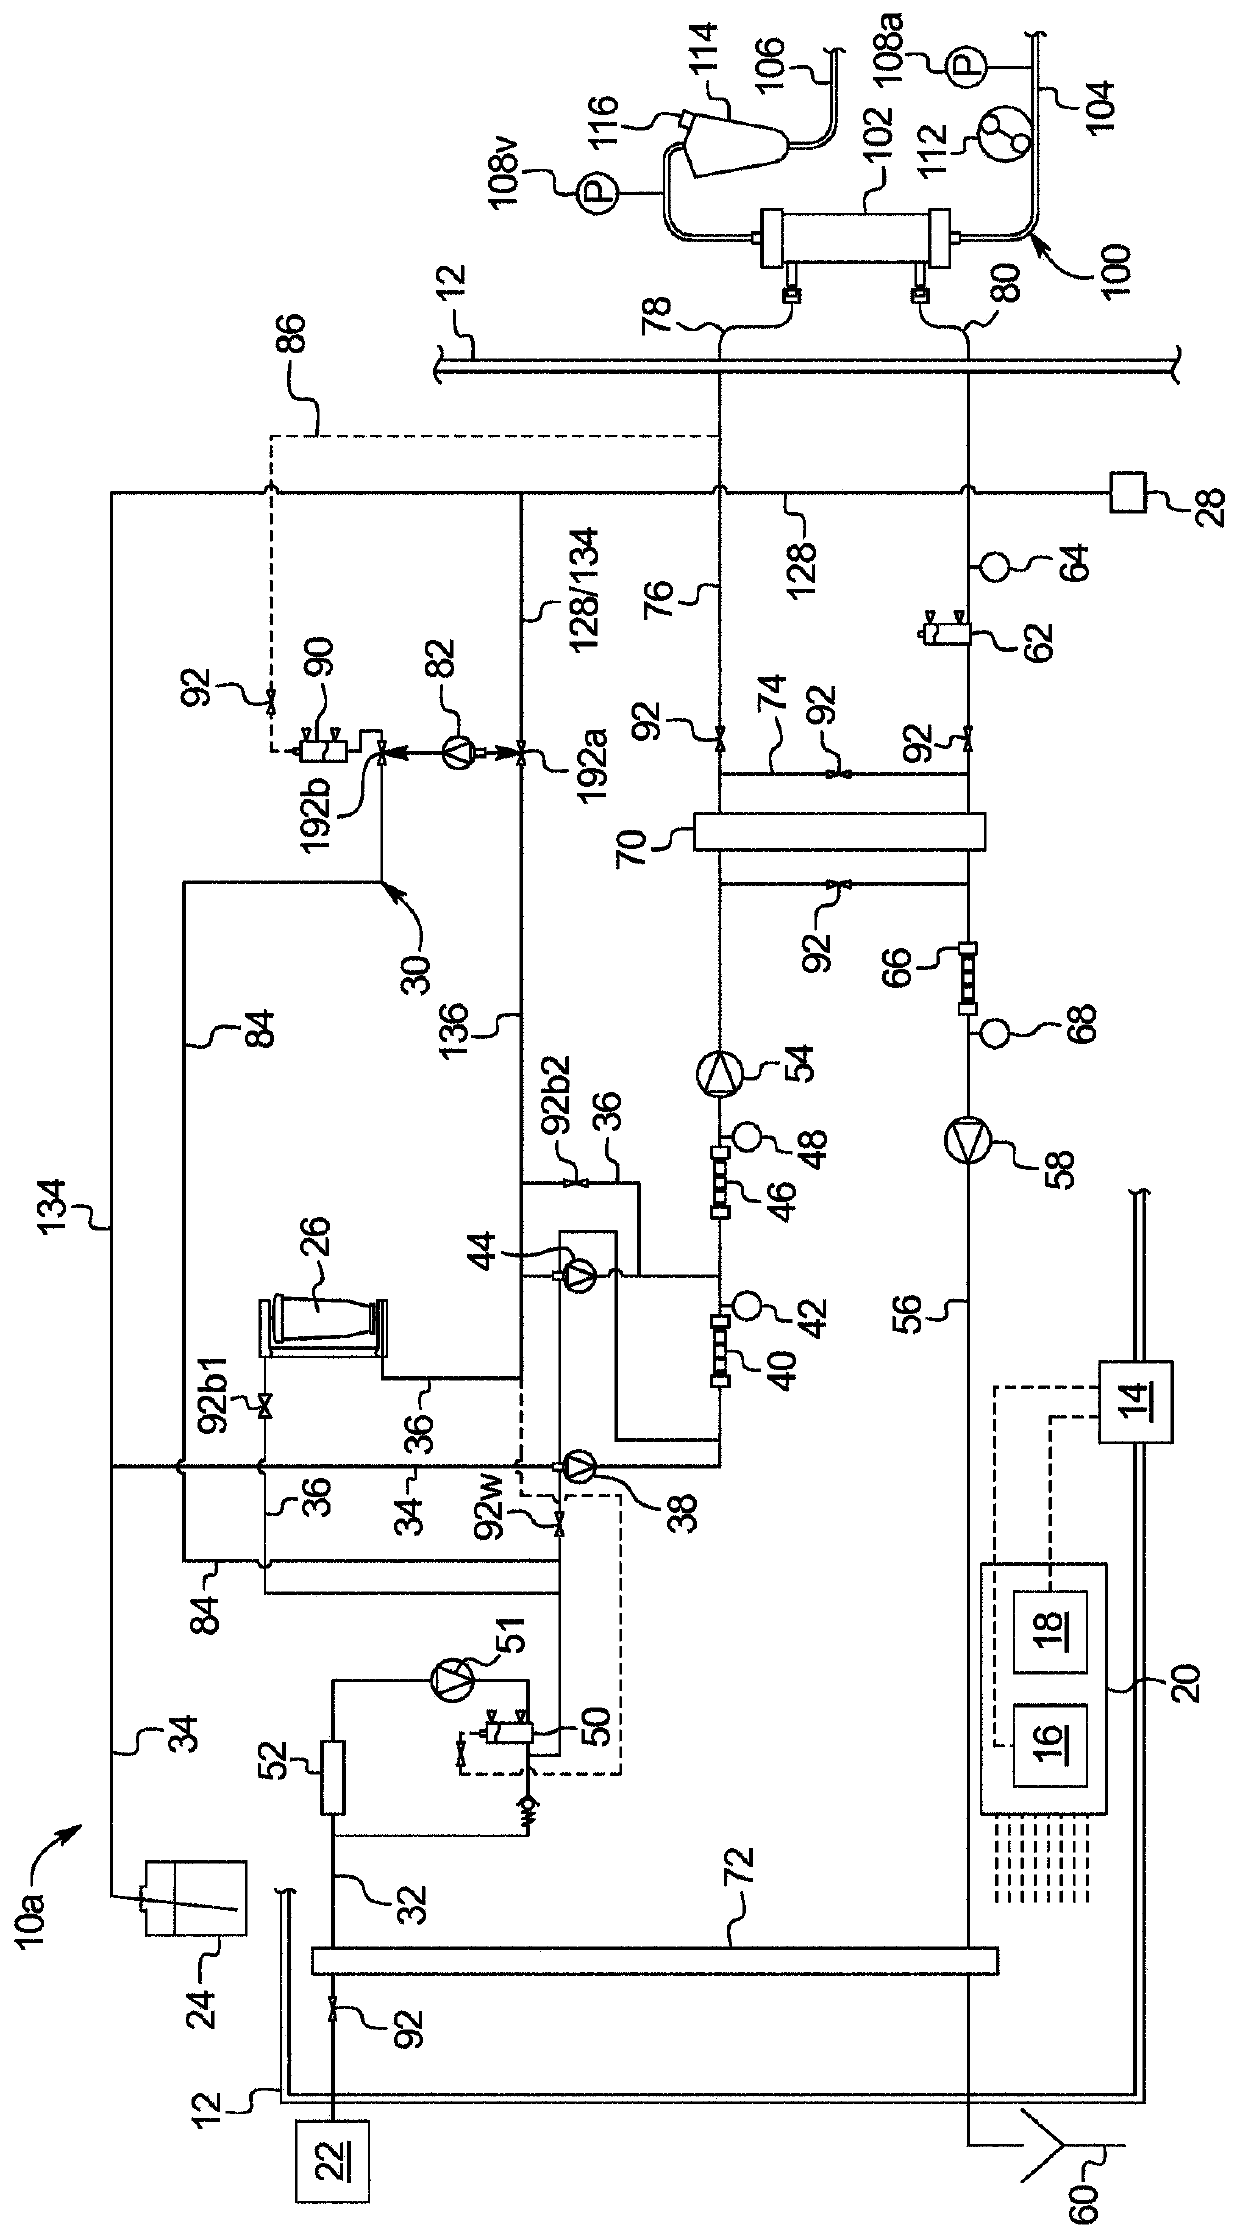 Dialysis system having carbon dioxide generation and prime